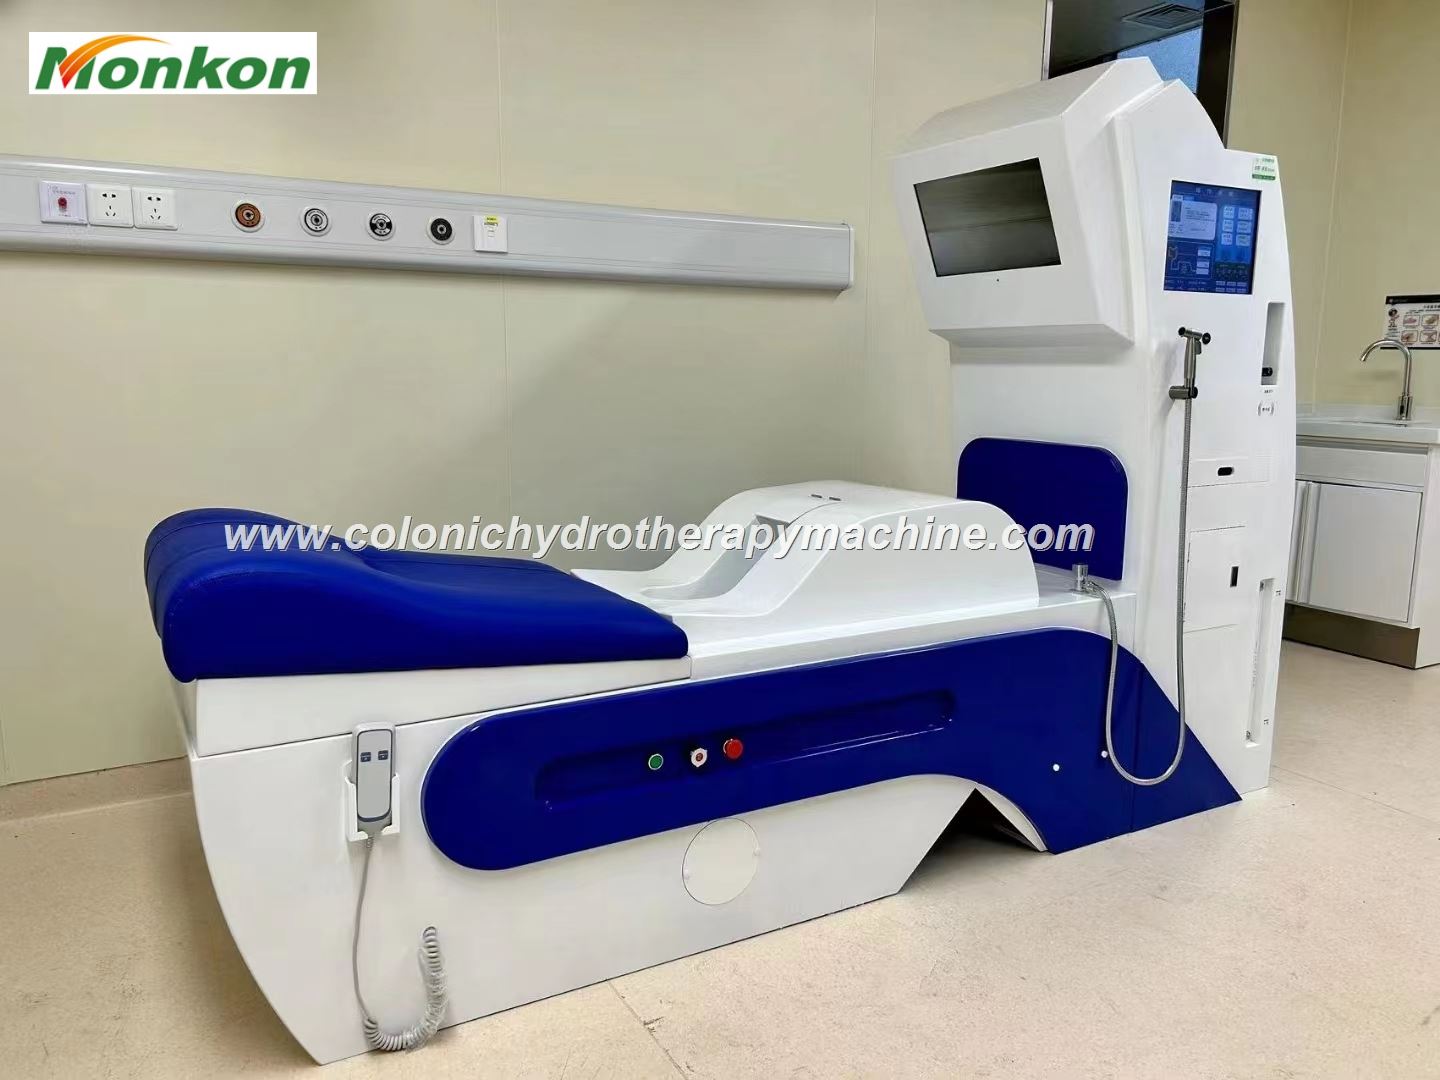 Colonic Hydrotherapy Machine for Sale